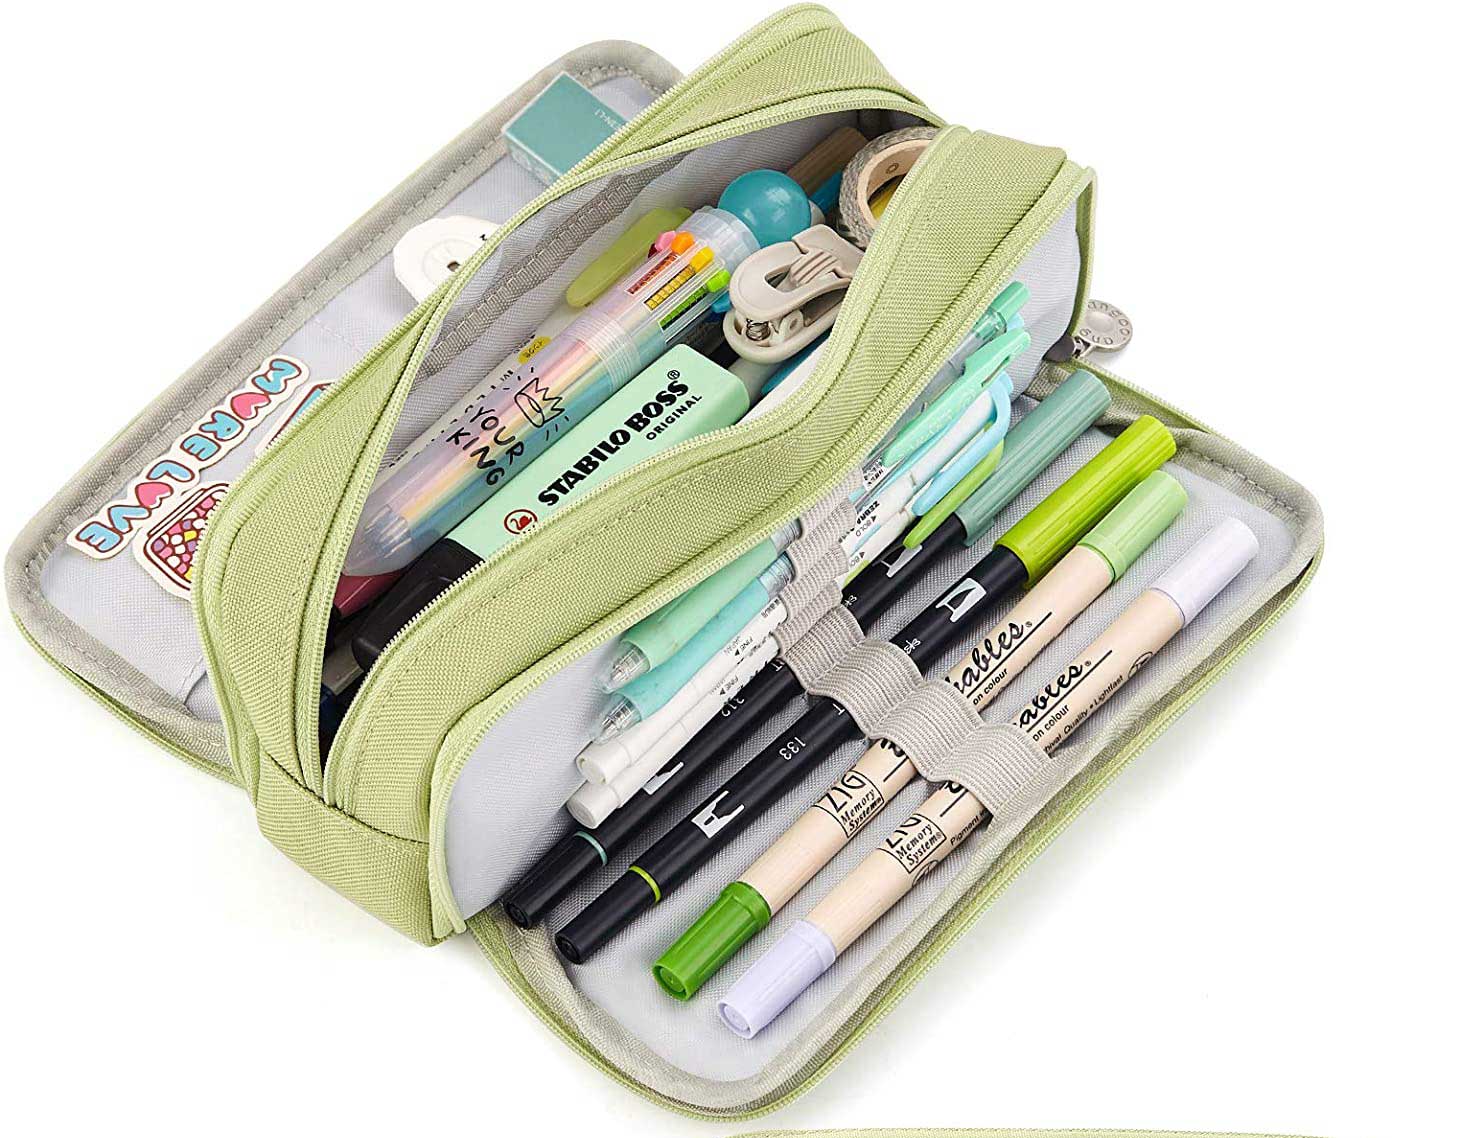 Pencil cases - To school & on the go